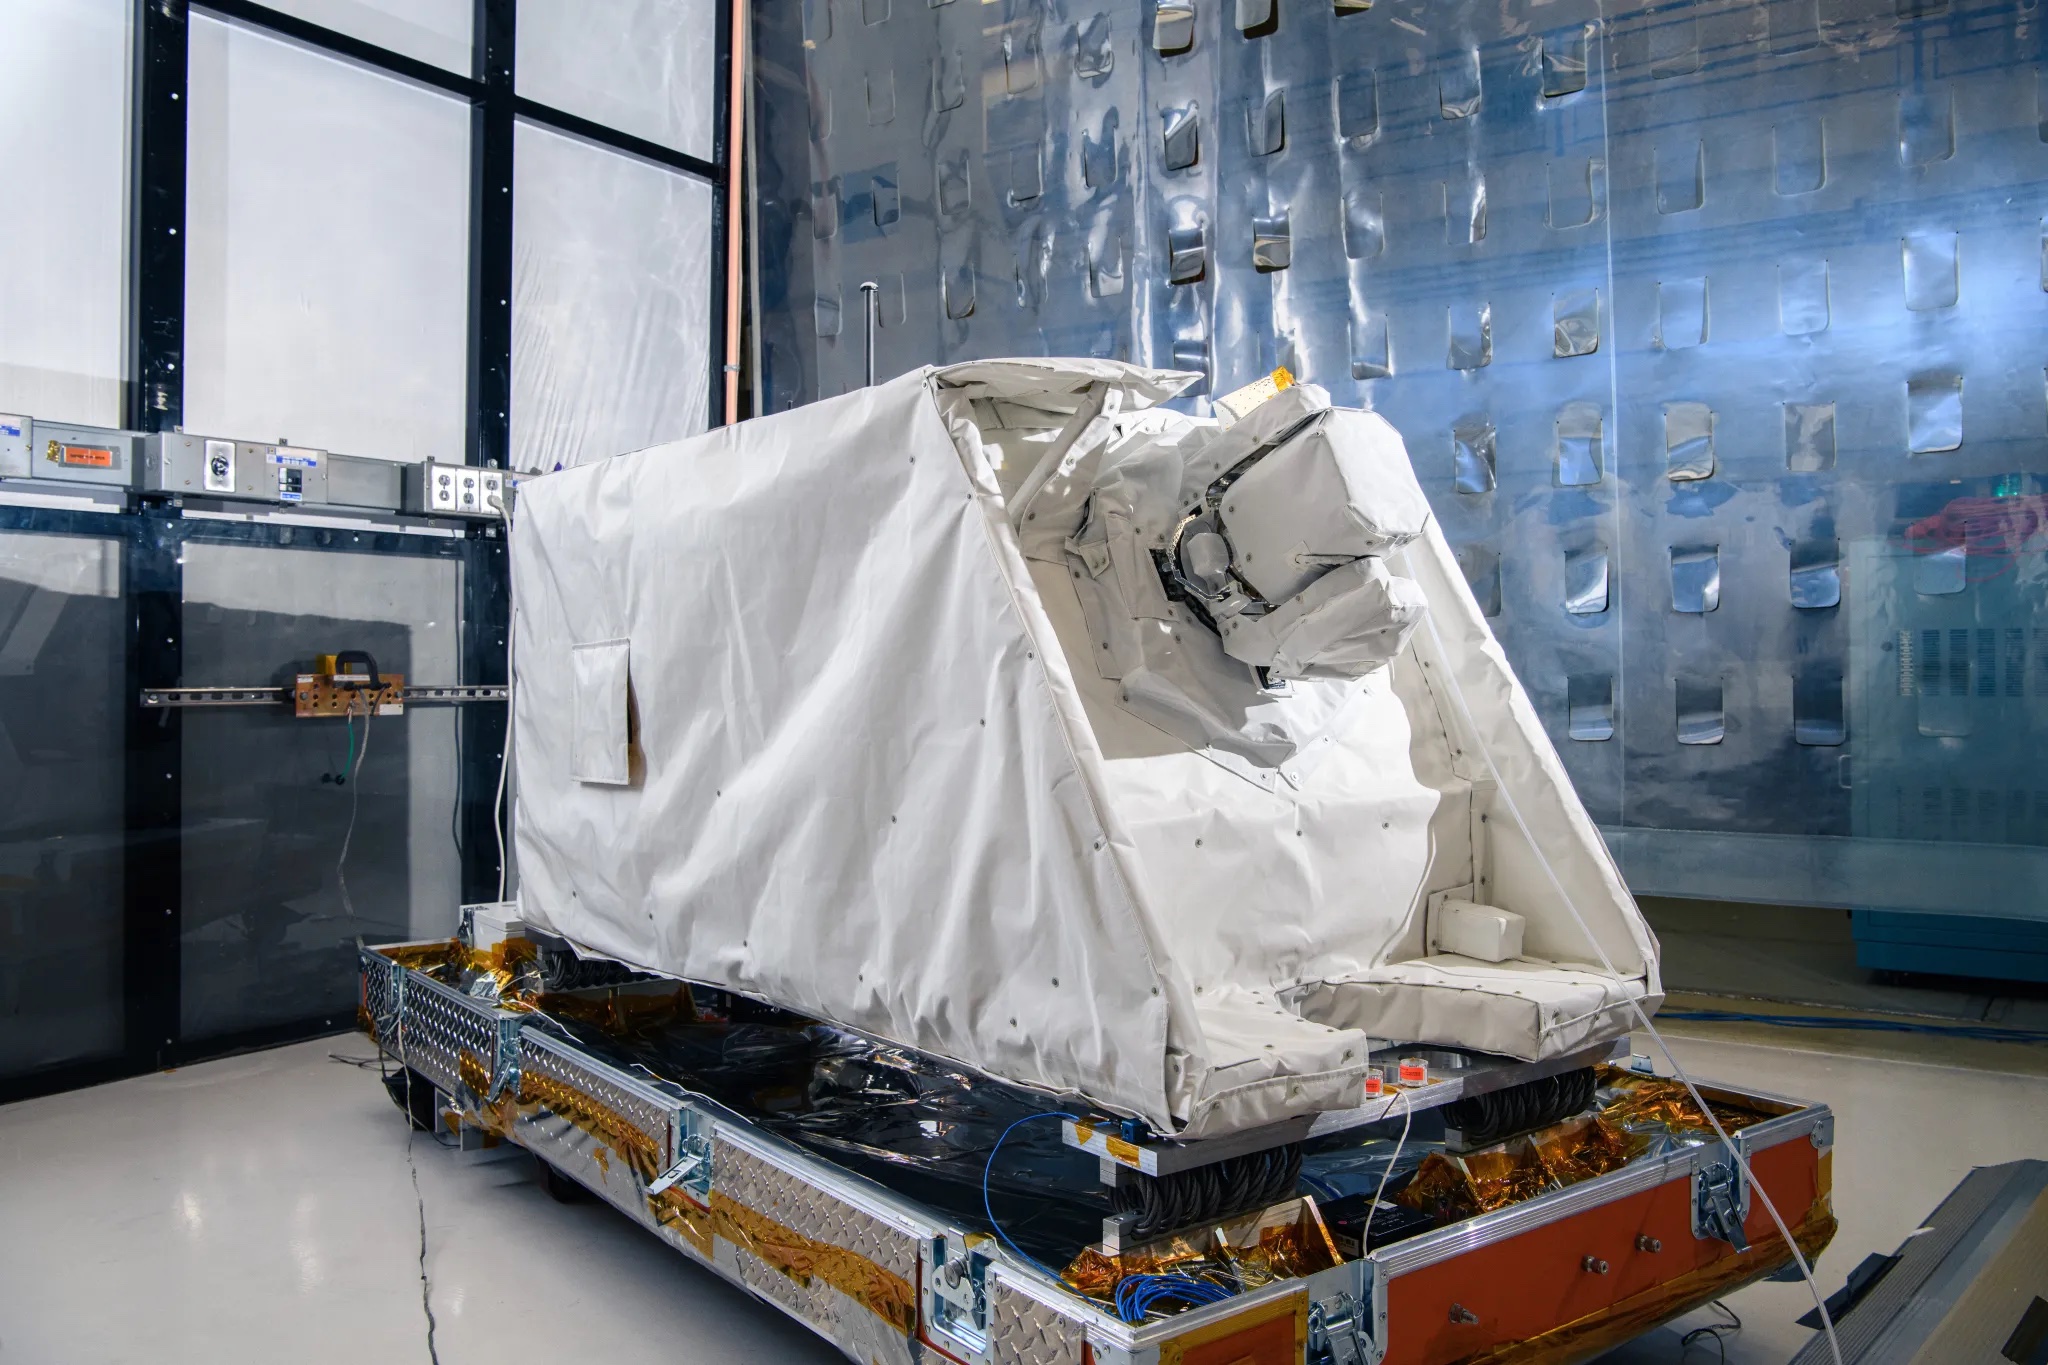 A refrigerator-sized structure with a white covering sits on a platform in a cleanroom. 